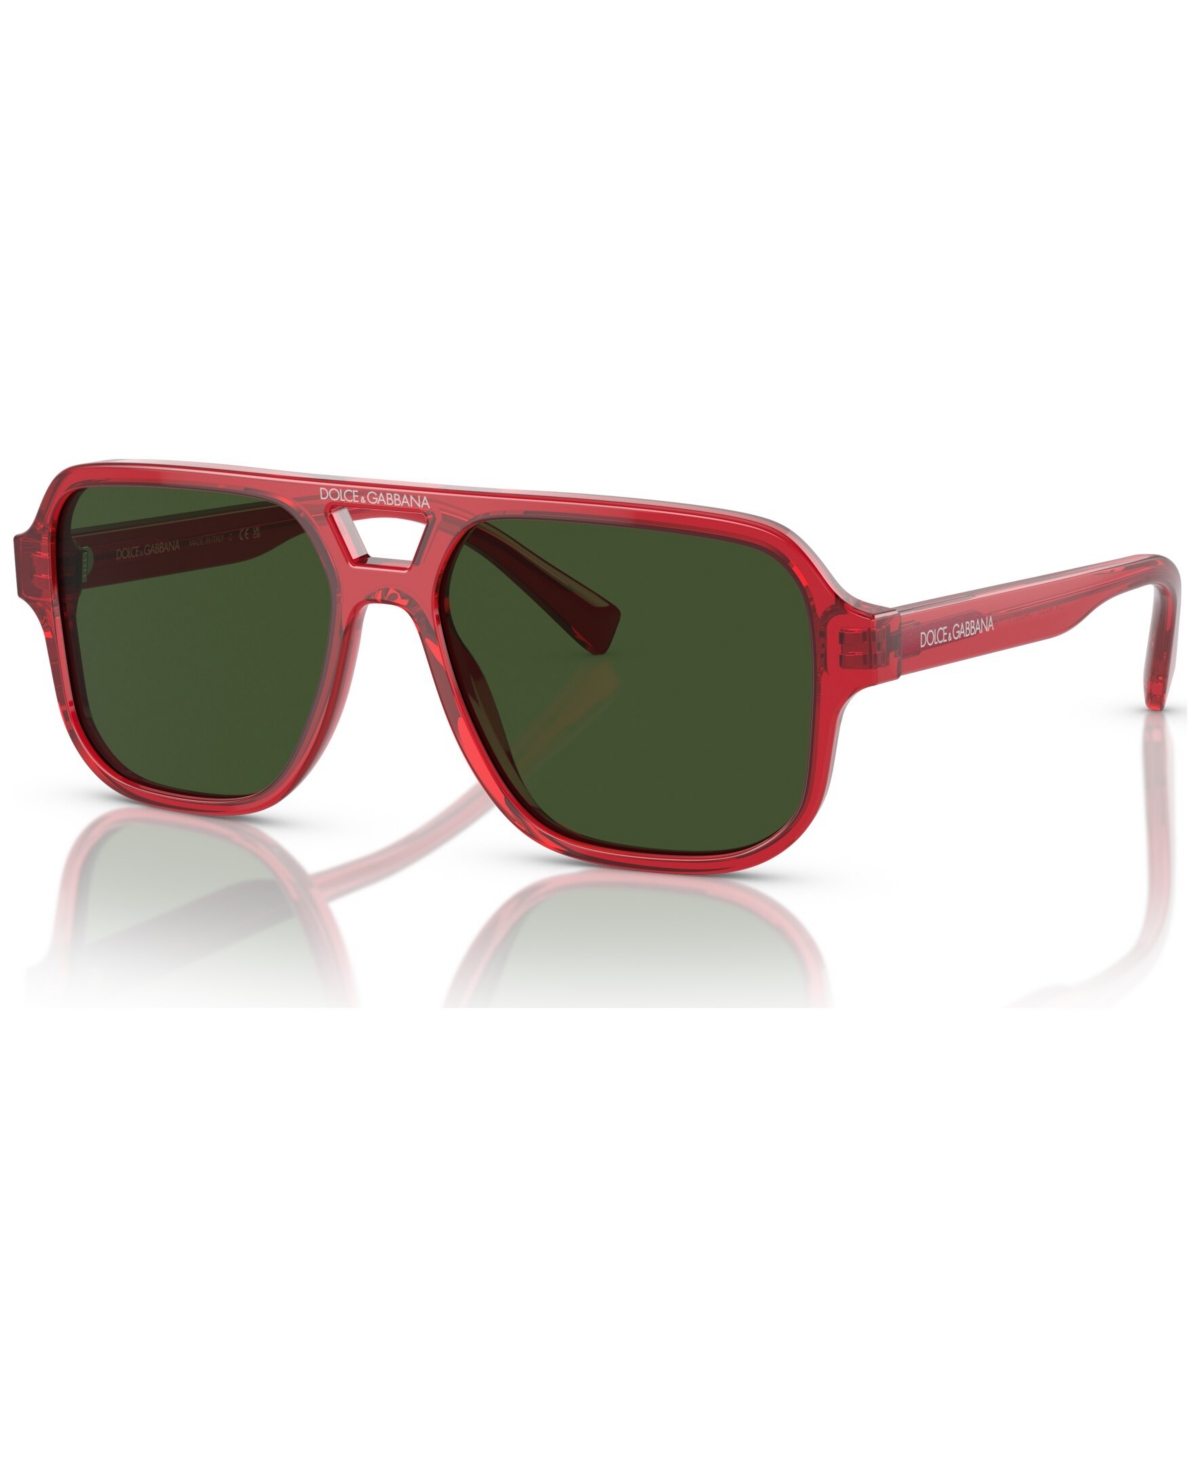 Dolce & Gabbana Kids Sunglasses, 0dx4003 (ages 7-10) In Red